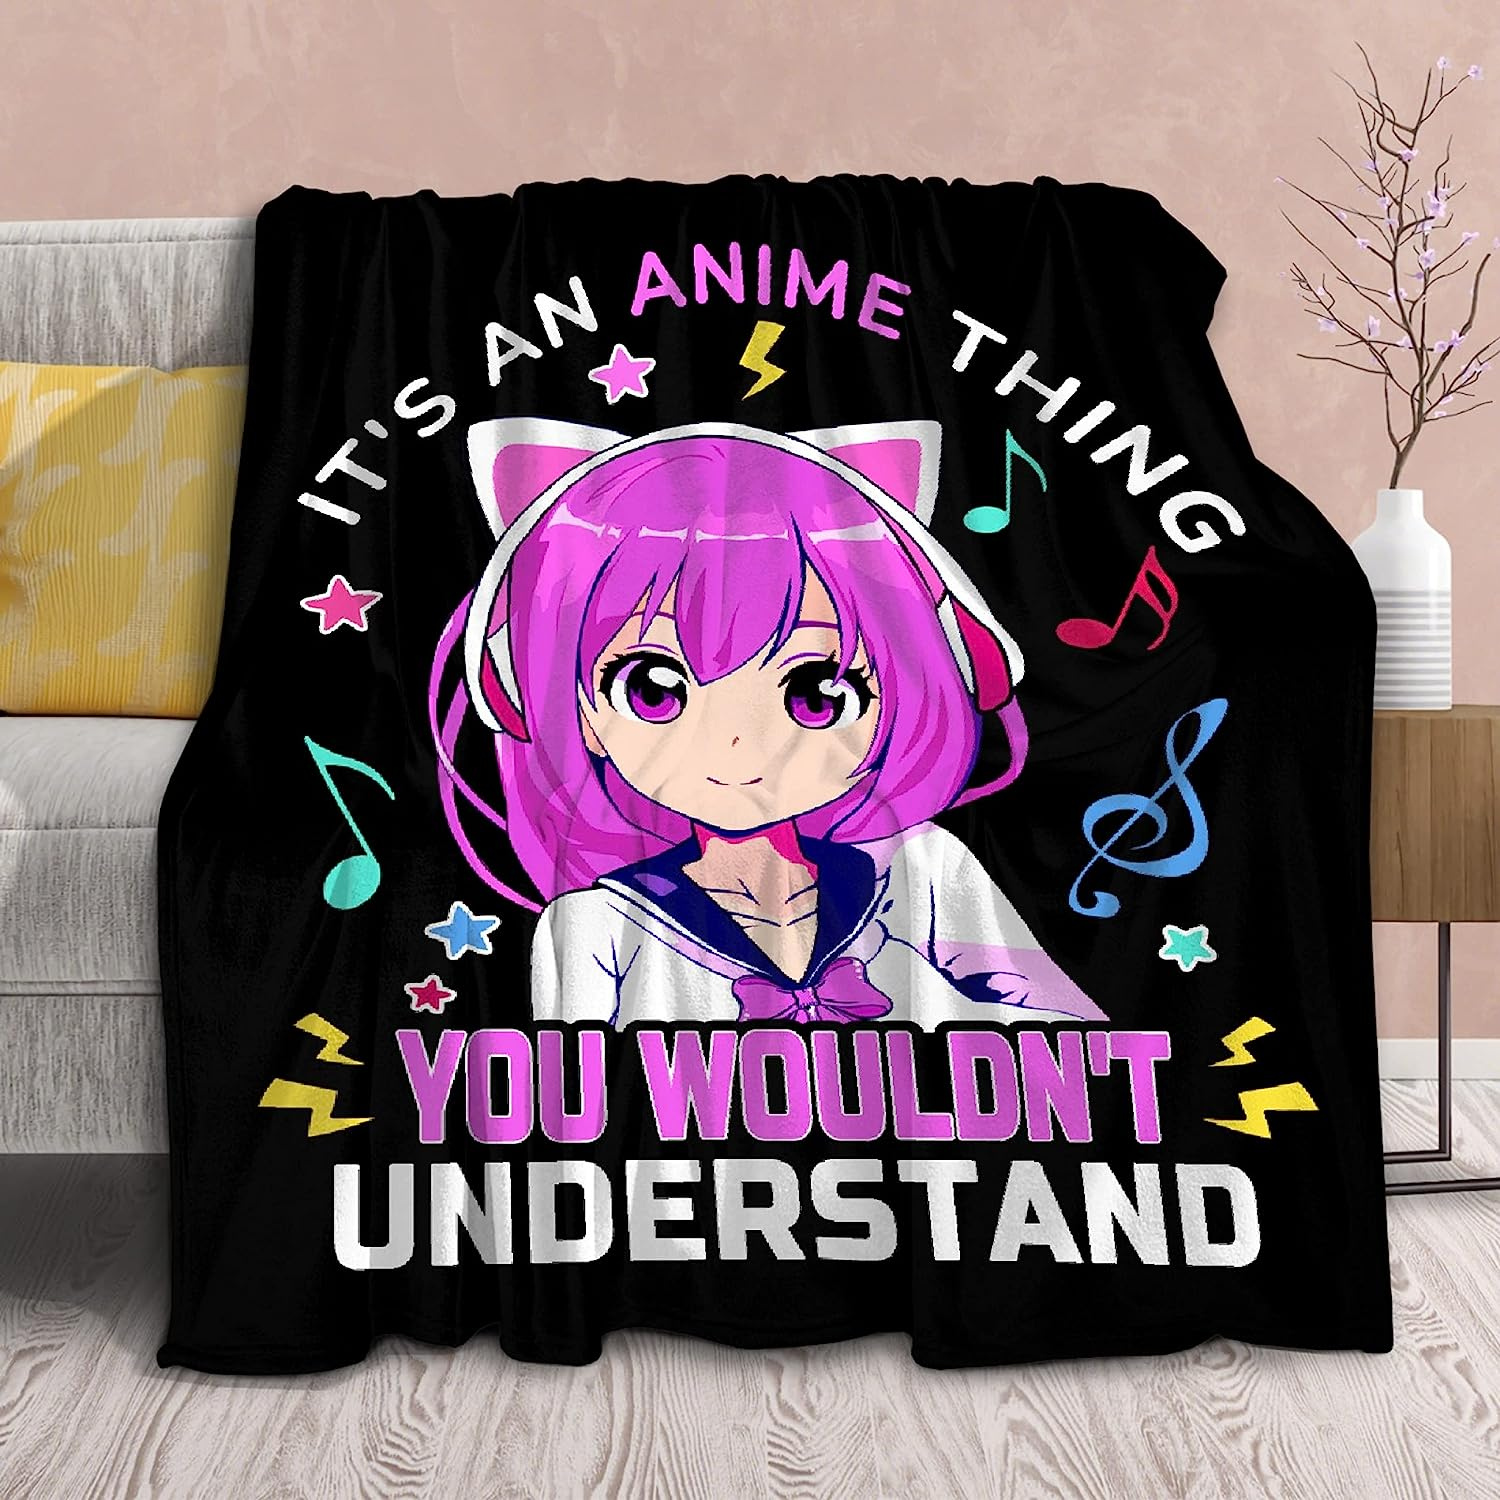 Candid Awe - Gifts for Anime Lovers: